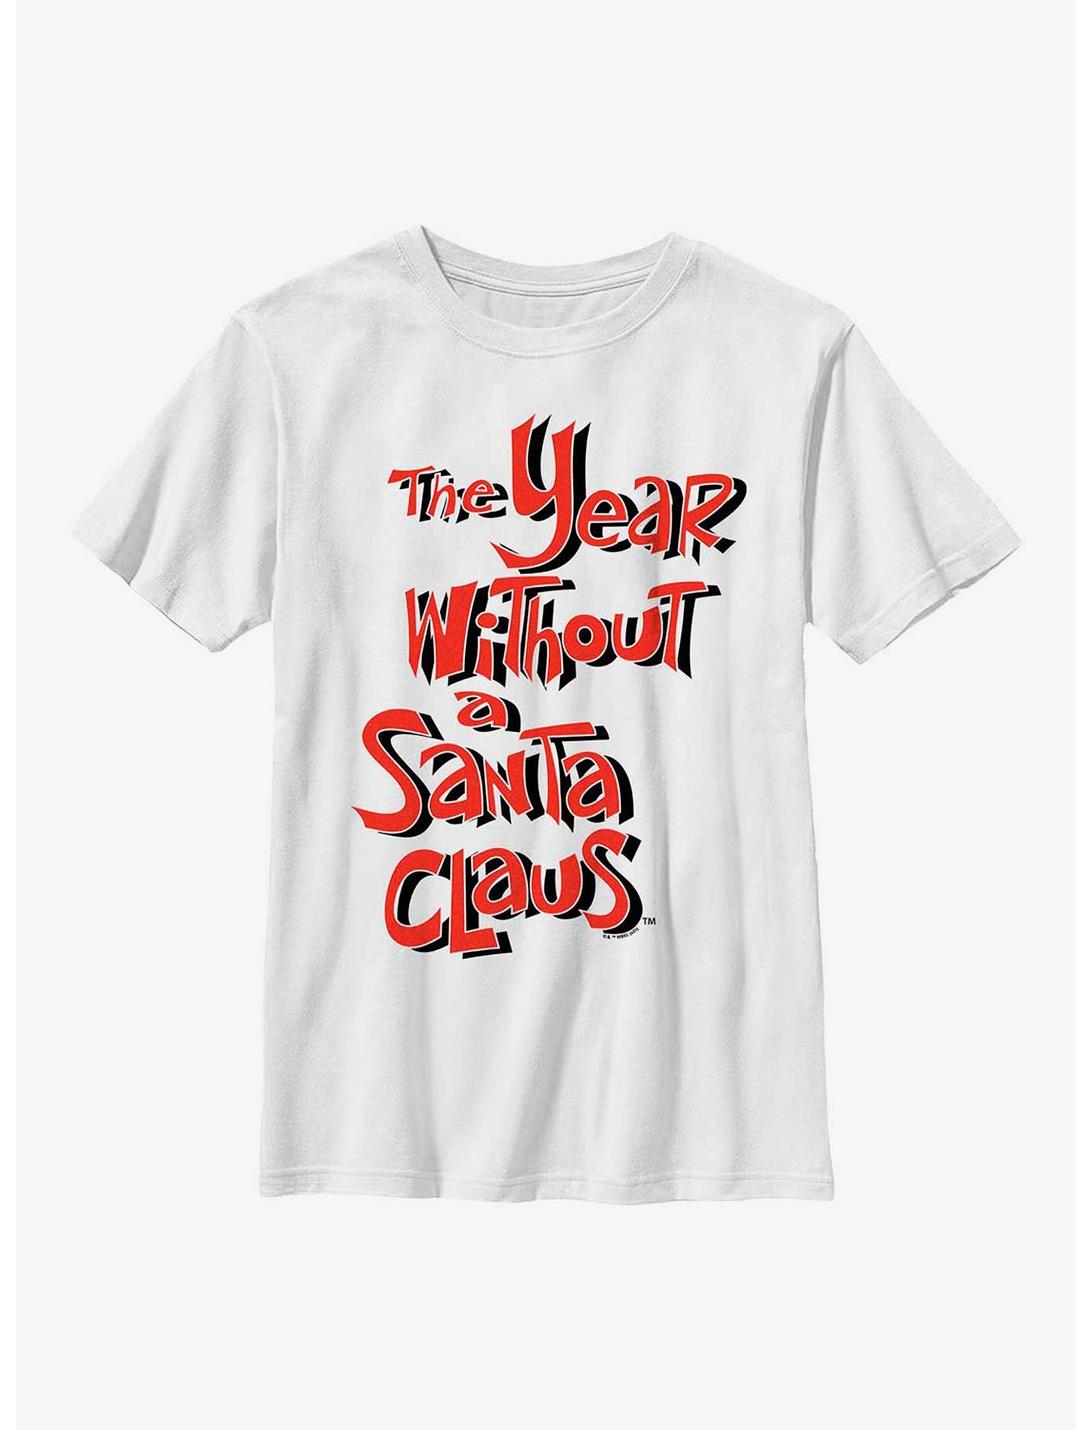 The Year Without Santa Claus Red Logo Youth T-Shirt, WHITE, hi-res